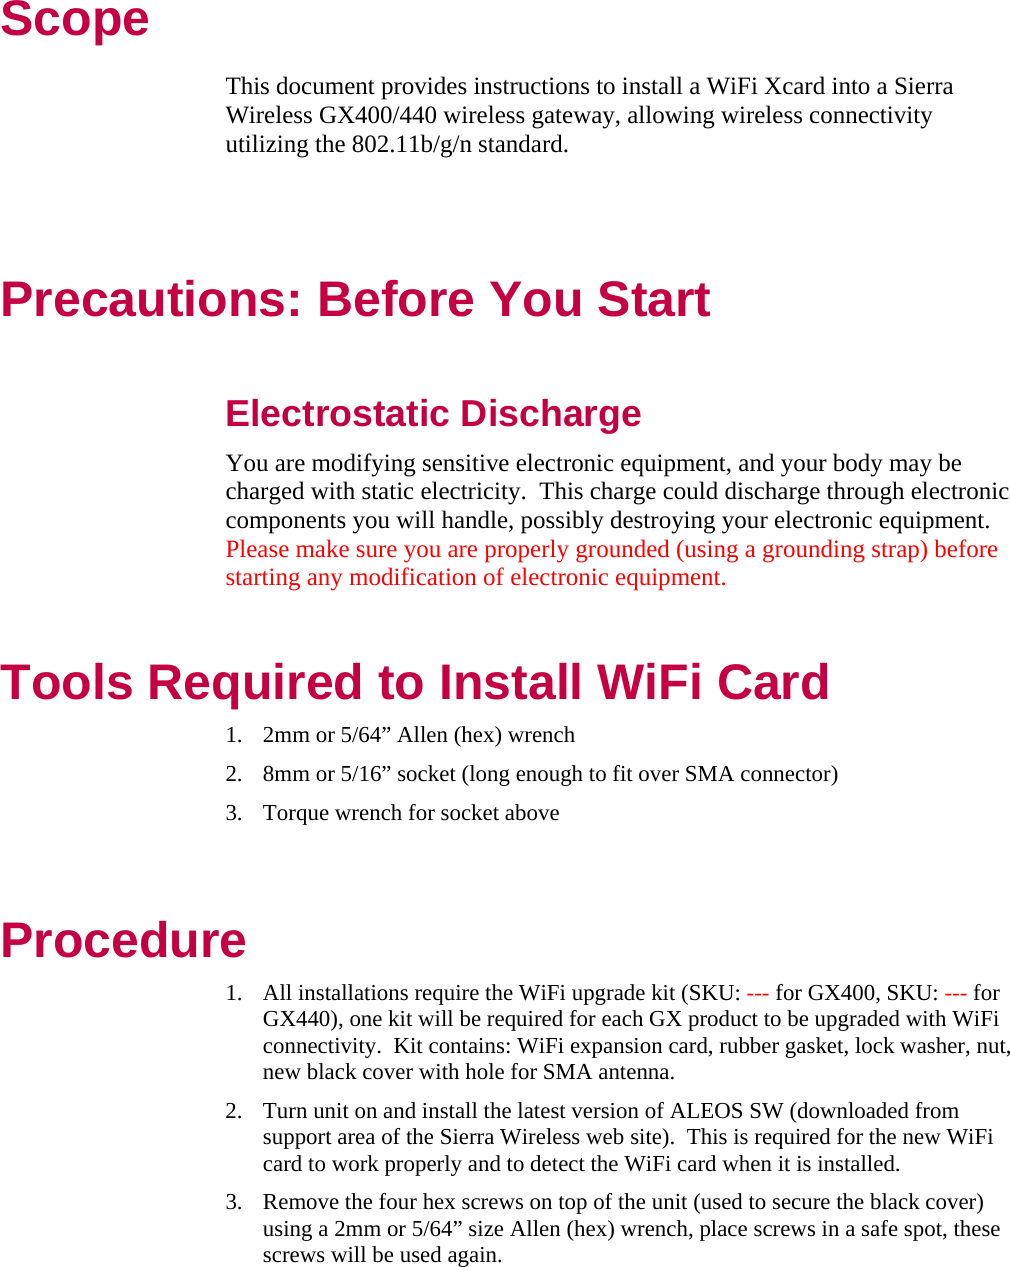 Scope This document provides instructions to install a WiFi Xcard into a Sierra Wireless GX400/440 wireless gateway, allowing wireless connectivity utilizing the 802.11b/g/n standard.   Precautions: Before You Start  Electrostatic Discharge You are modifying sensitive electronic equipment, and your body may be charged with static electricity.  This charge could discharge through electronic components you will handle, possibly destroying your electronic equipment.  Please make sure you are properly grounded (using a grounding strap) before starting any modification of electronic equipment. Tools Required to Install WiFi Card 1. 2mm or 5/64” Allen (hex) wrench 2. 8mm or 5/16” socket (long enough to fit over SMA connector) 3. Torque wrench for socket above  Procedure 1. All installations require the WiFi upgrade kit (SKU: --- for GX400, SKU: --- for GX440), one kit will be required for each GX product to be upgraded with WiFi connectivity.  Kit contains: WiFi expansion card, rubber gasket, lock washer, nut, new black cover with hole for SMA antenna.  2. Turn unit on and install the latest version of ALEOS SW (downloaded from support area of the Sierra Wireless web site).  This is required for the new WiFi card to work properly and to detect the WiFi card when it is installed. 3. Remove the four hex screws on top of the unit (used to secure the black cover) using a 2mm or 5/64” size Allen (hex) wrench, place screws in a safe spot, these screws will be used again. 